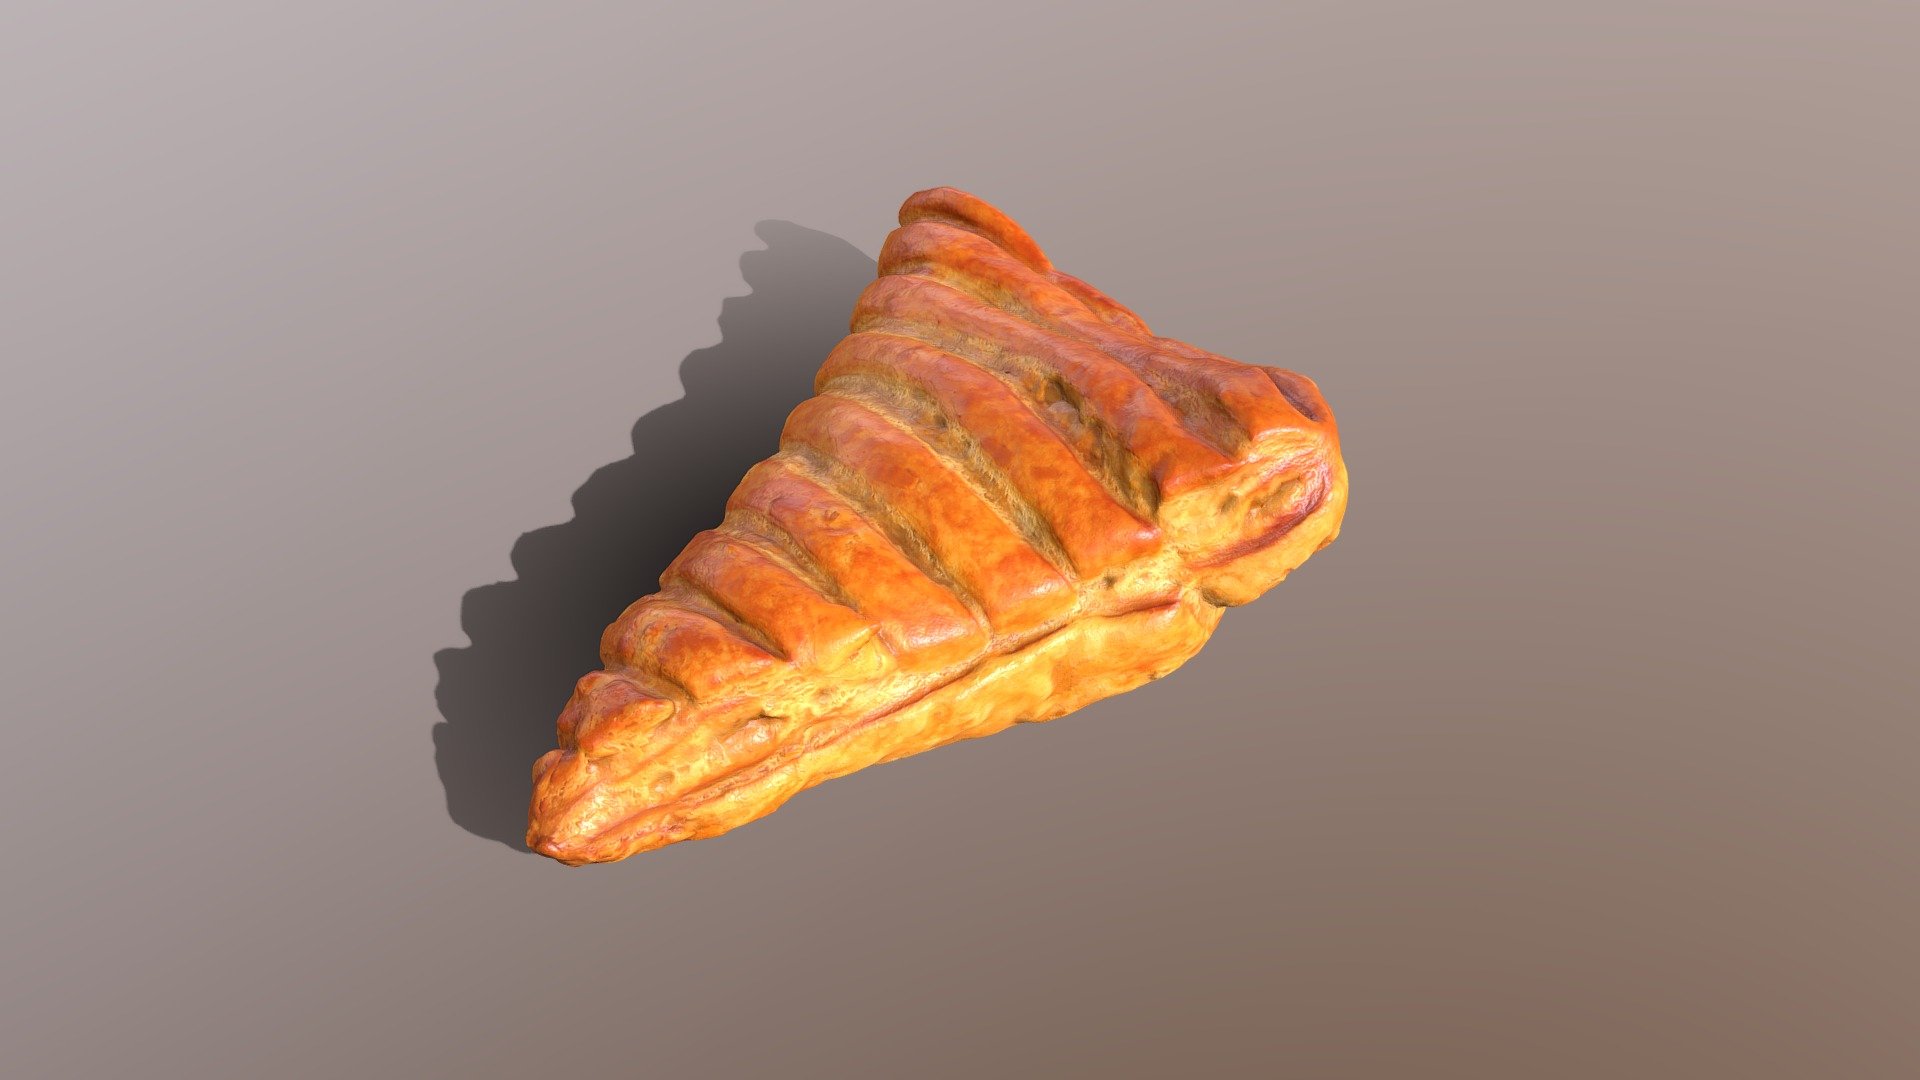 3D scan of a delicious crispy Apple Turnover which is made by CAKESBURG Online Premium Cake Shop in UK.

Textures 4096*4096px PBR photoscan-based materials Base Color, Normal Map, Roughness) - Apple Turnover - Buy Royalty Free 3D model by Cakesburg Premium 3D Cake Shop (@Viscom_Cakesburg) 3d model